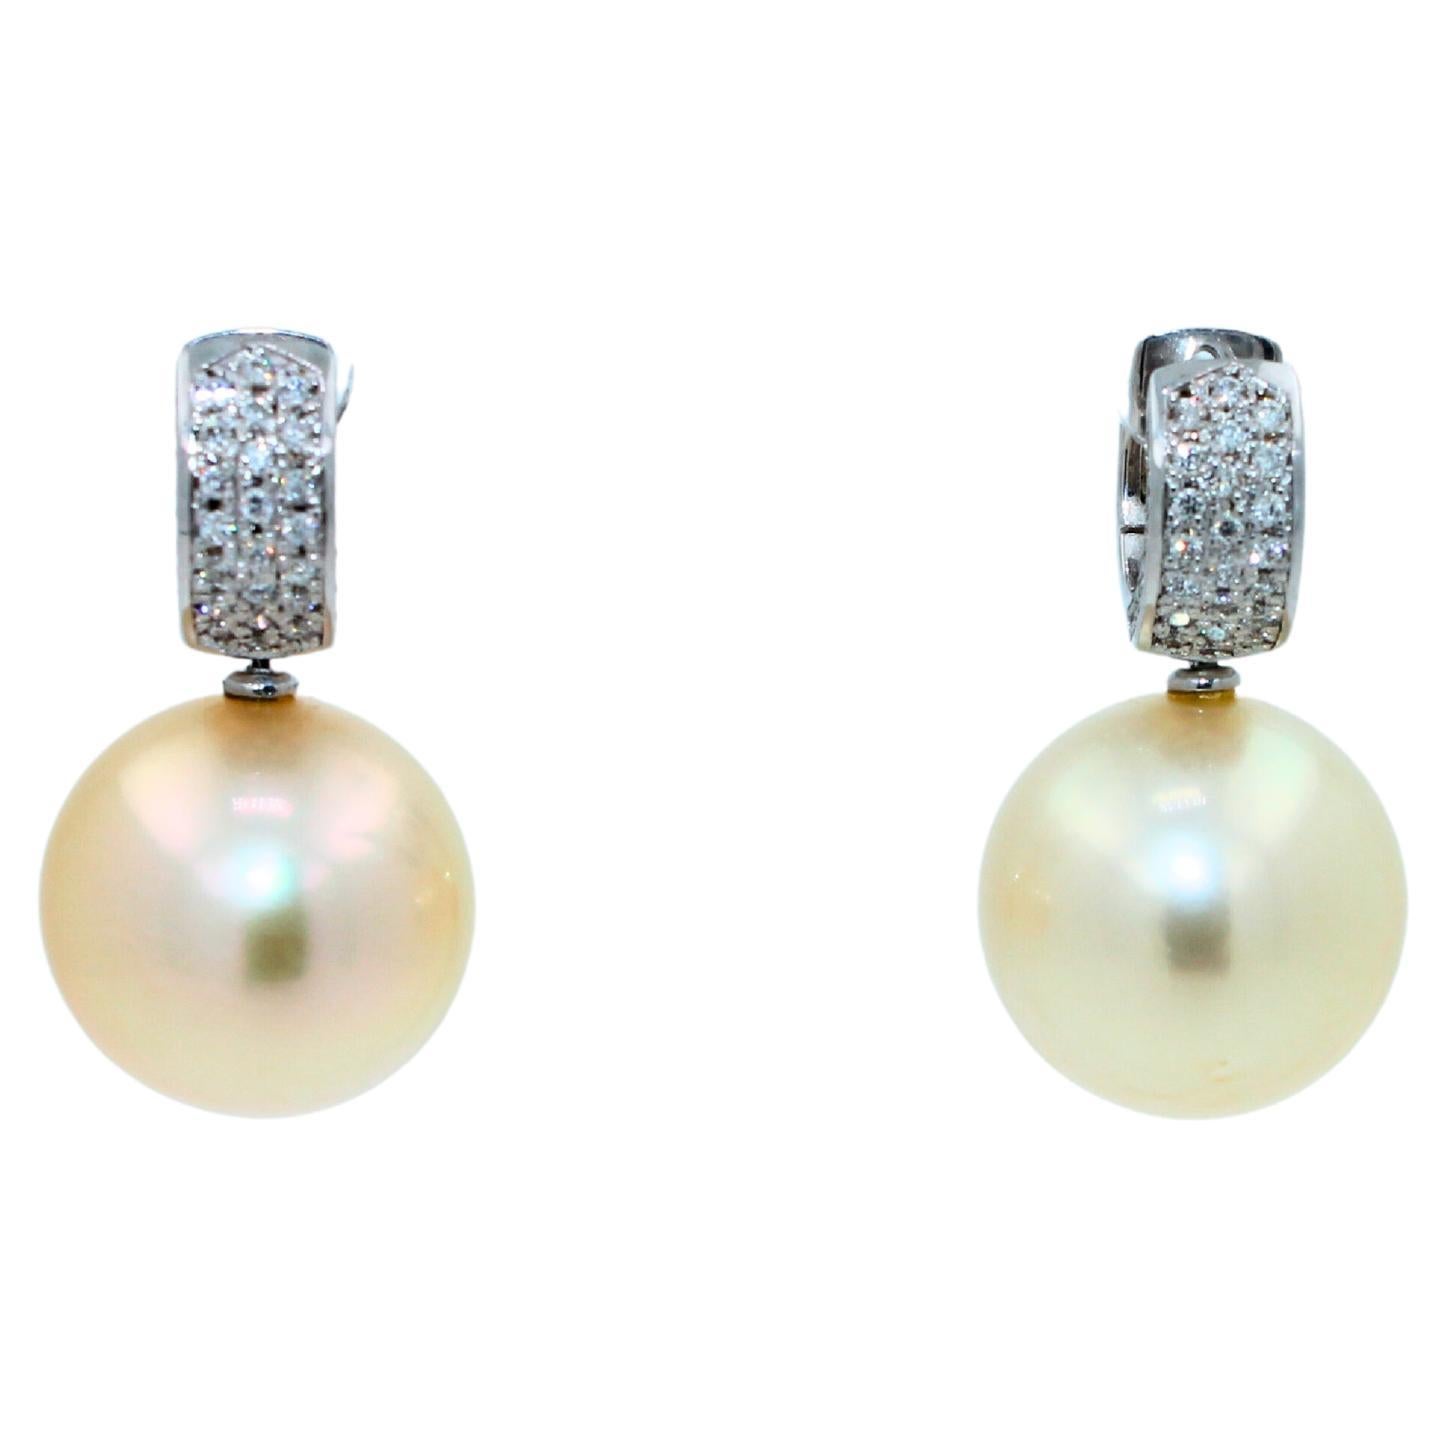 Natural Light Golden Warm AAA Quality South Sea Pearls
Very Reflective Surface - Almost Mirror-Like 
Full Classic Sphere Shapes
16-17 MM Diameter Size
22.65 Grams Total Weight
0.70 cts Diamonds VVS Quality
3.2 CM Full Length of Earrings
18 Karat